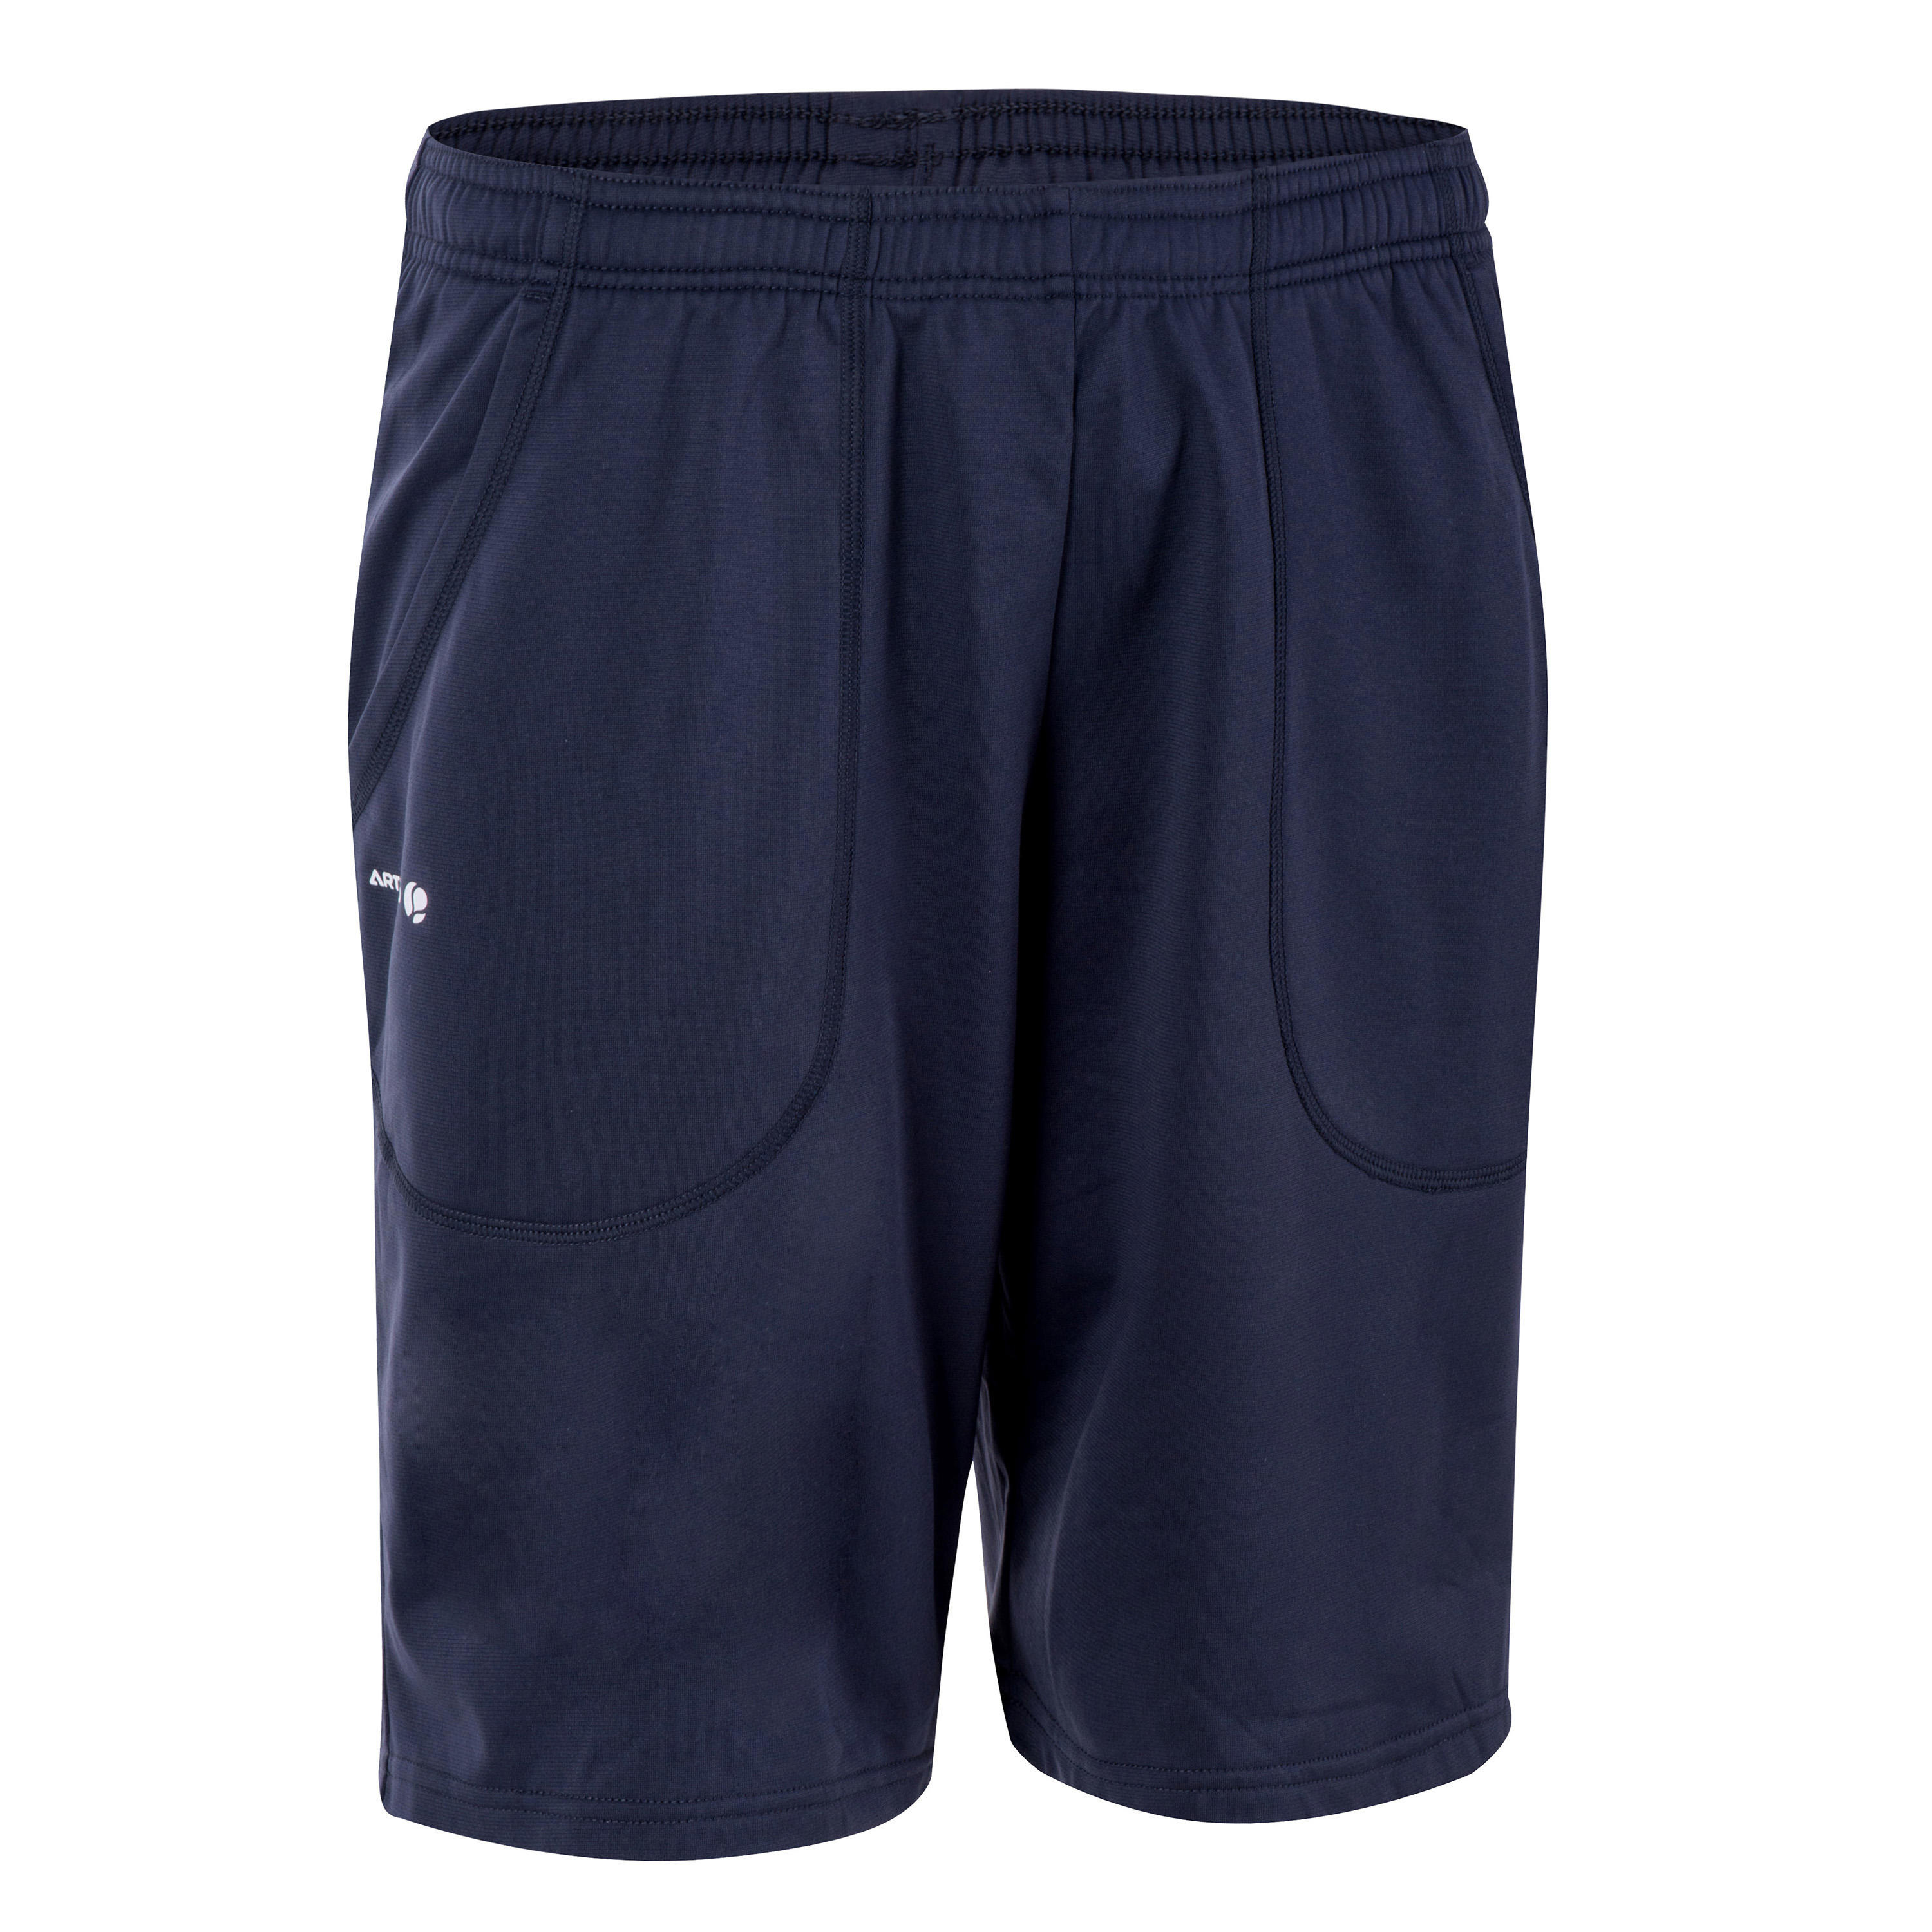 Essential Thermal Shorts - Navy Blue 1/8